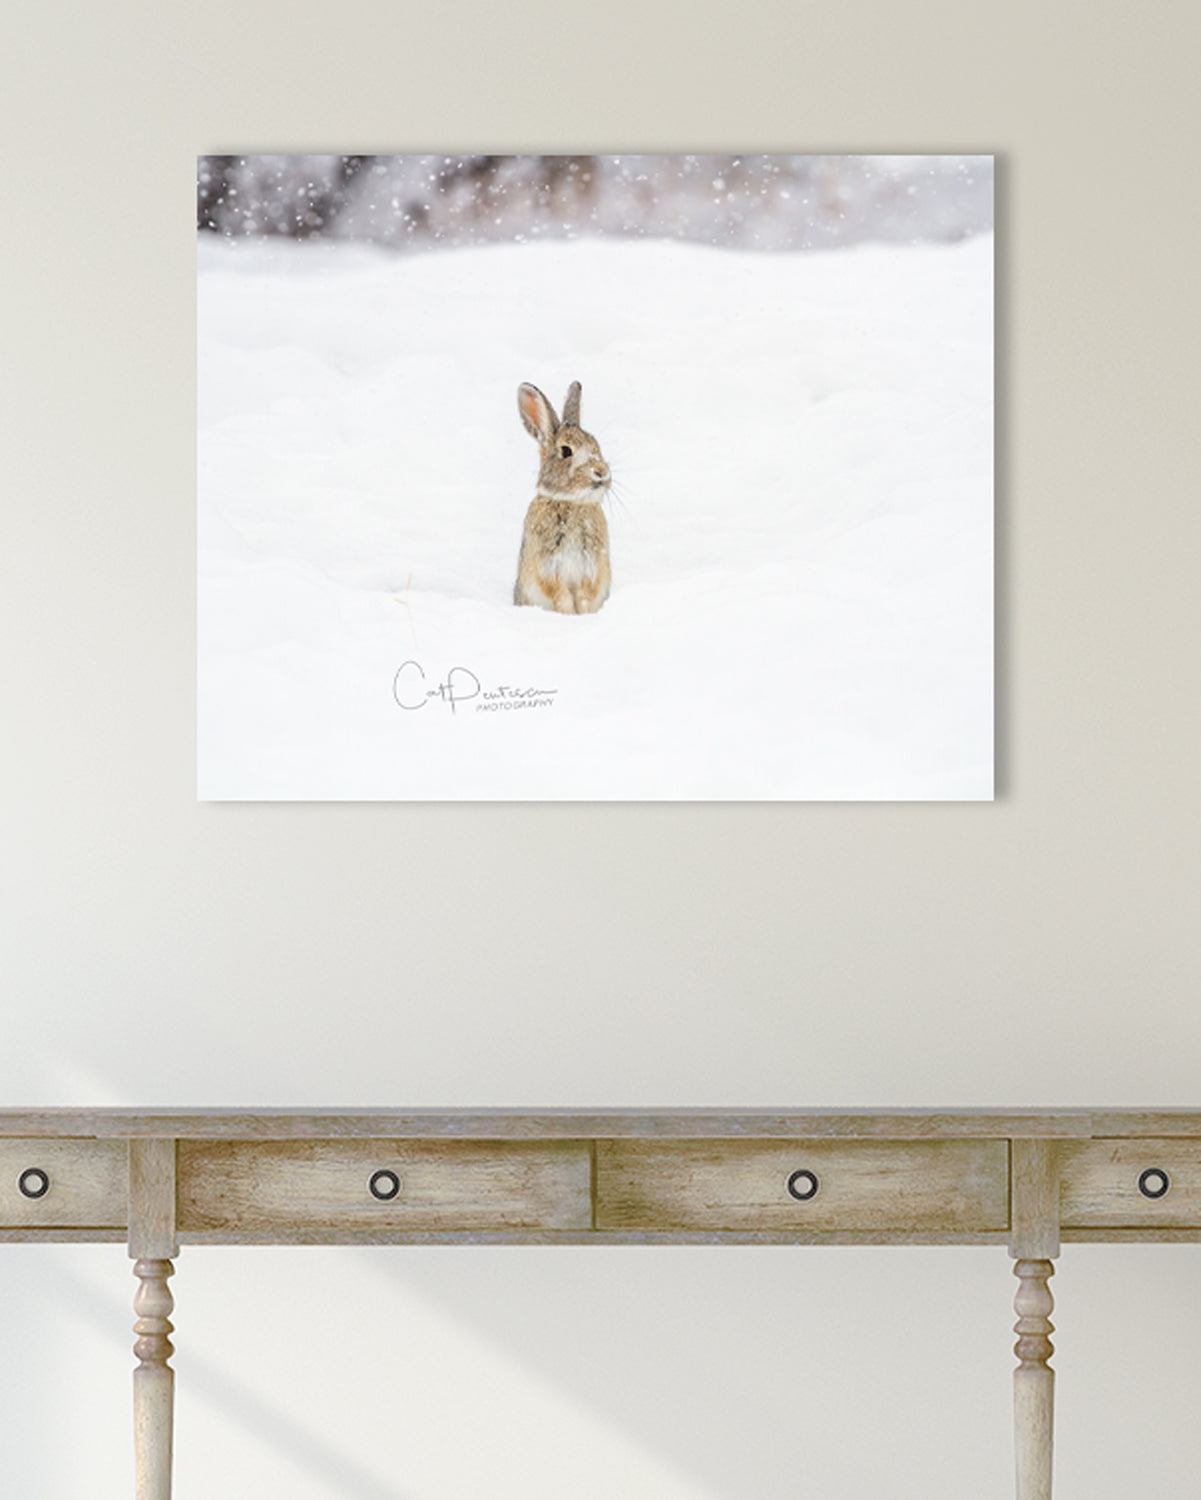 Cold winter day. Snow falling. Wild bunny rabbit sitting up in deep snow. Available on metal, canvas or as a print. Cat Pentescu Photography 